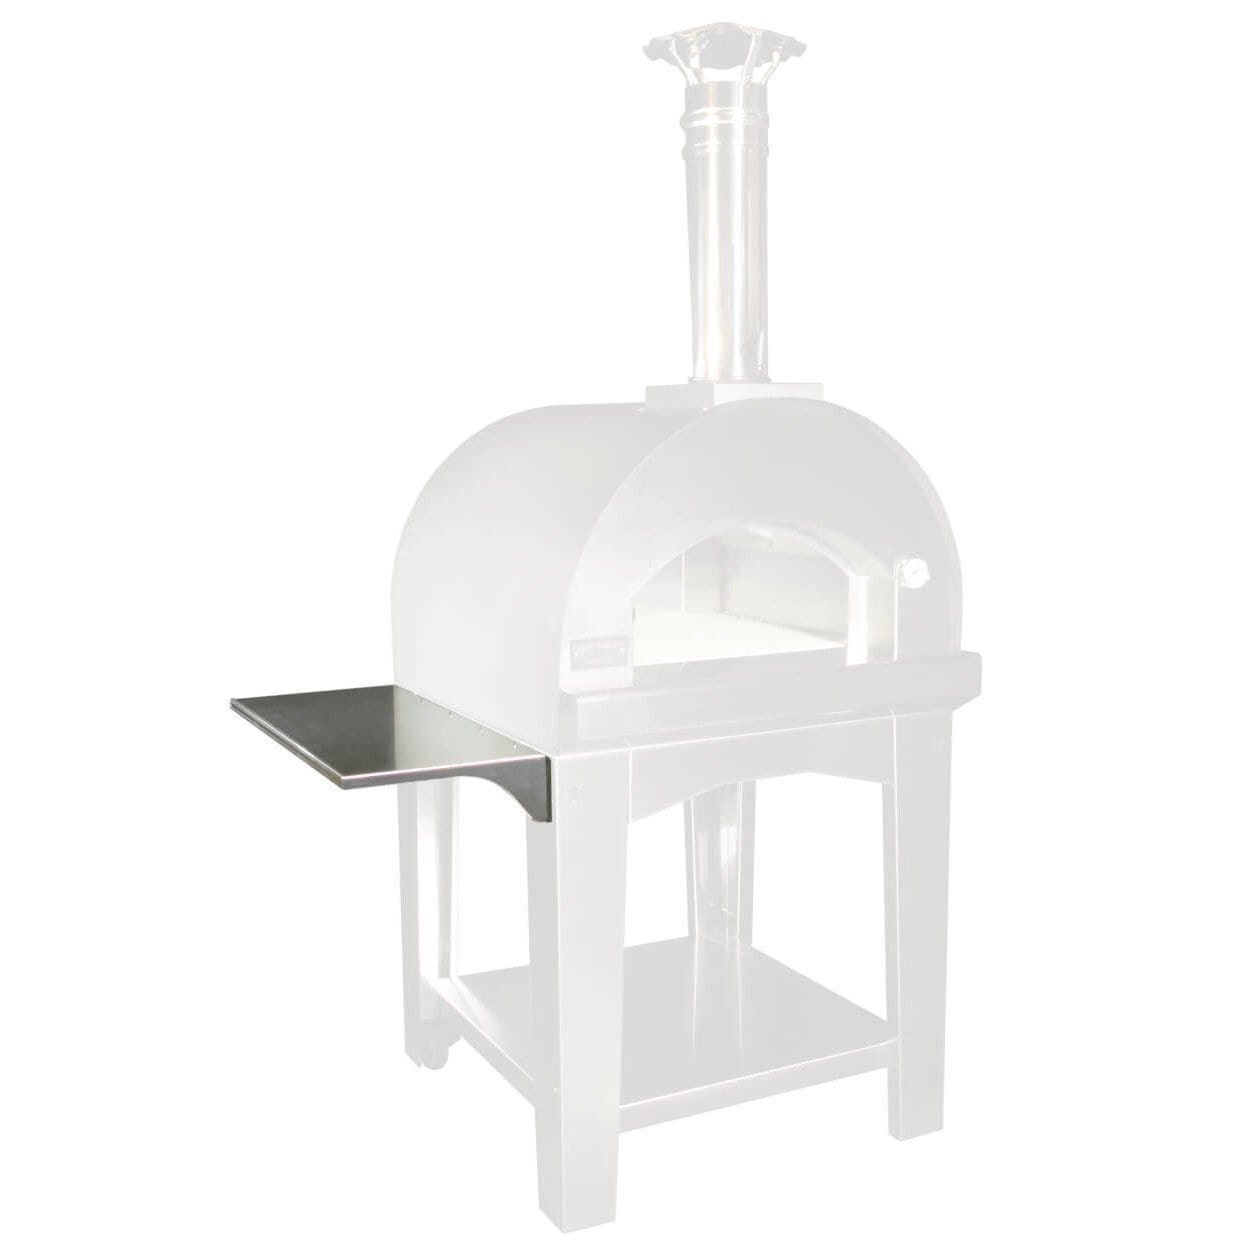 Fontana Forni Pizza Ovens BBQ Accessories Wood-fired Oven Shelf